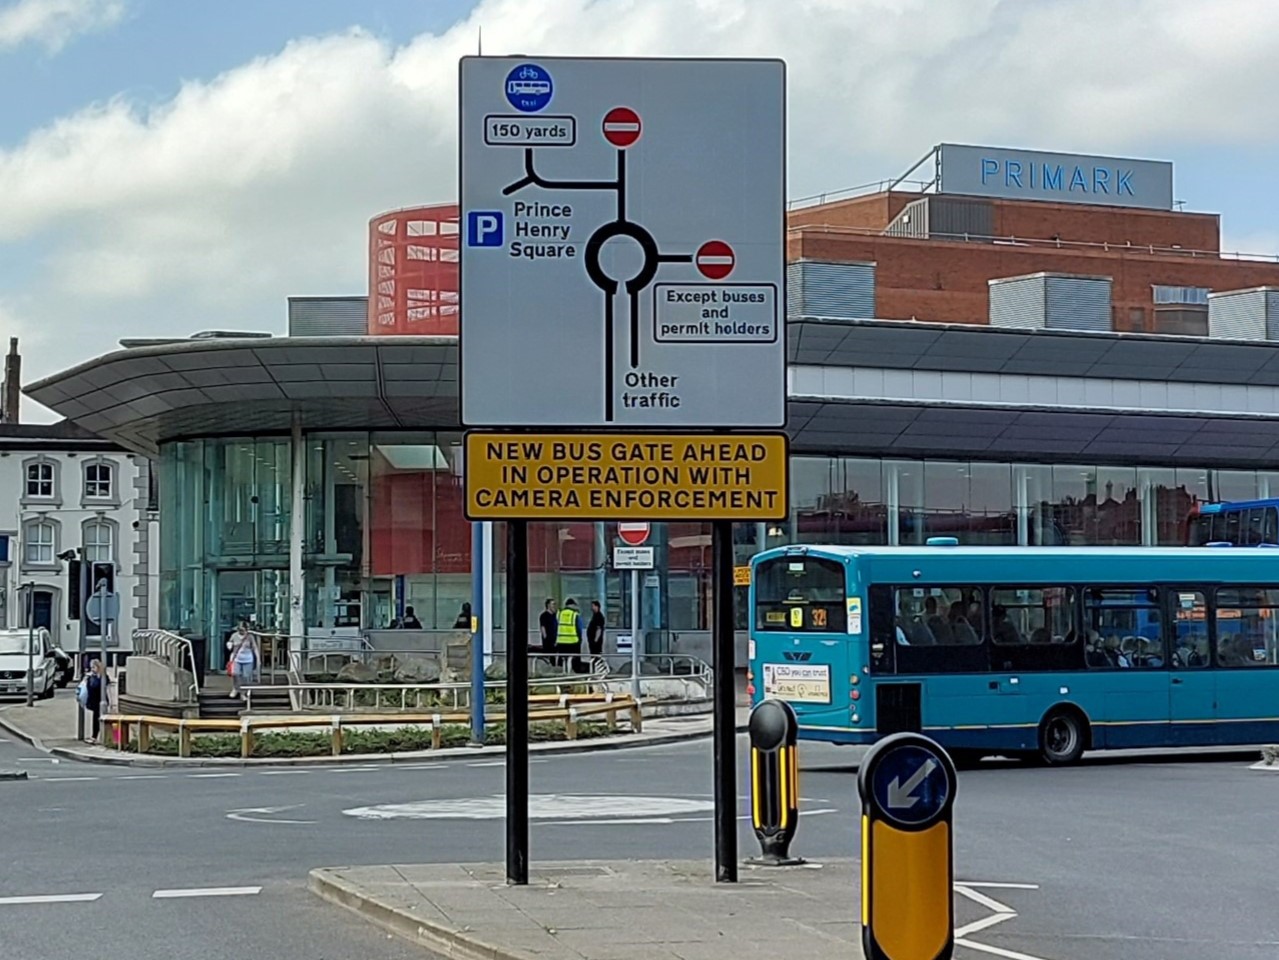 Scotland Road bus gate - Signage at the junction with Winwick Street and the bus interchange